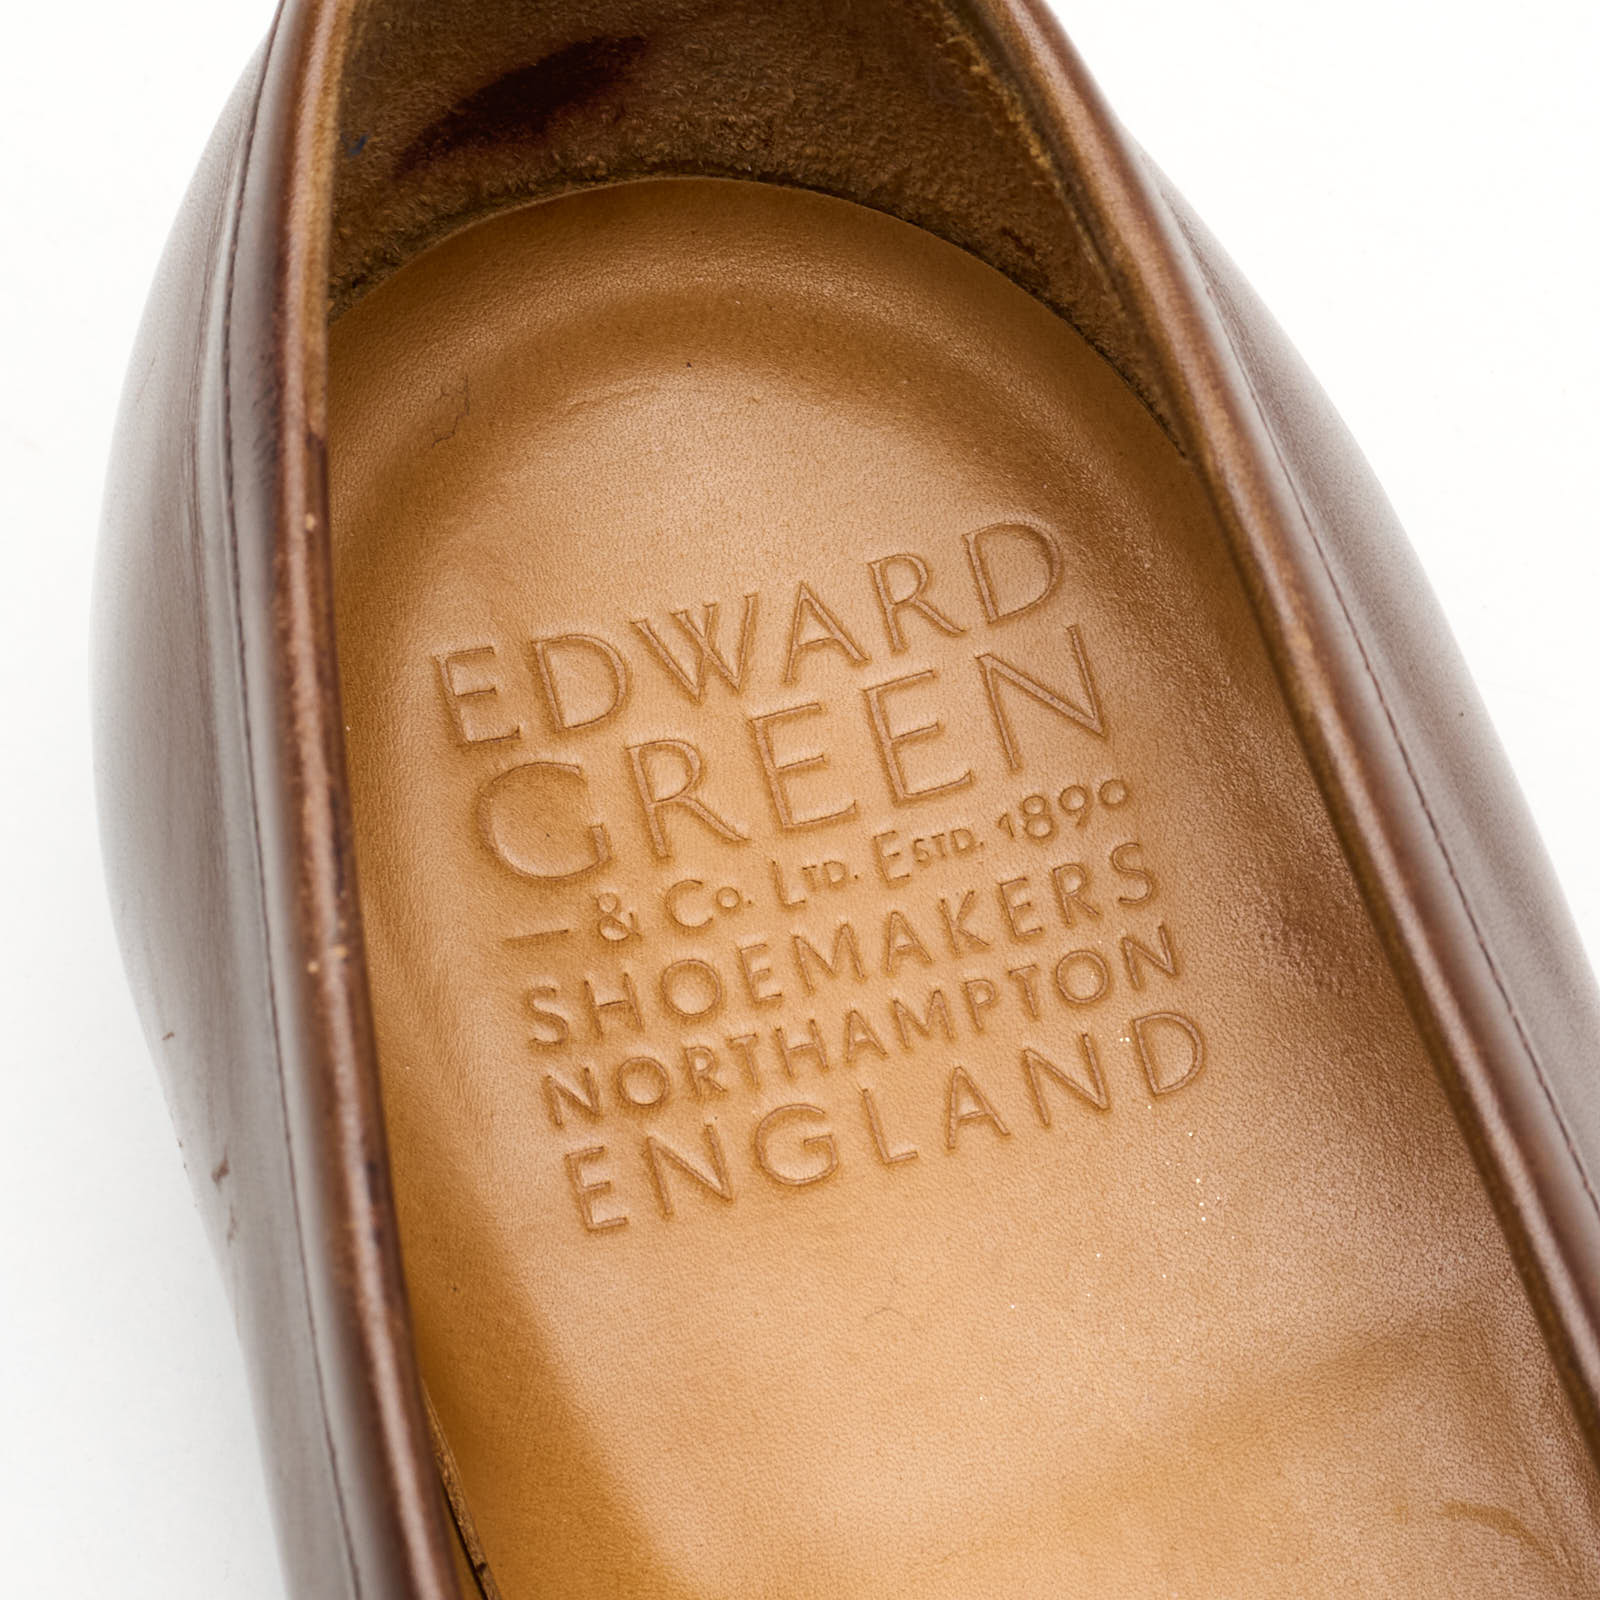 EDWARD GREEN Piccadilly Brown Calfskin Penny Loafer Shoes UK 8 US 8.5 E Last 184